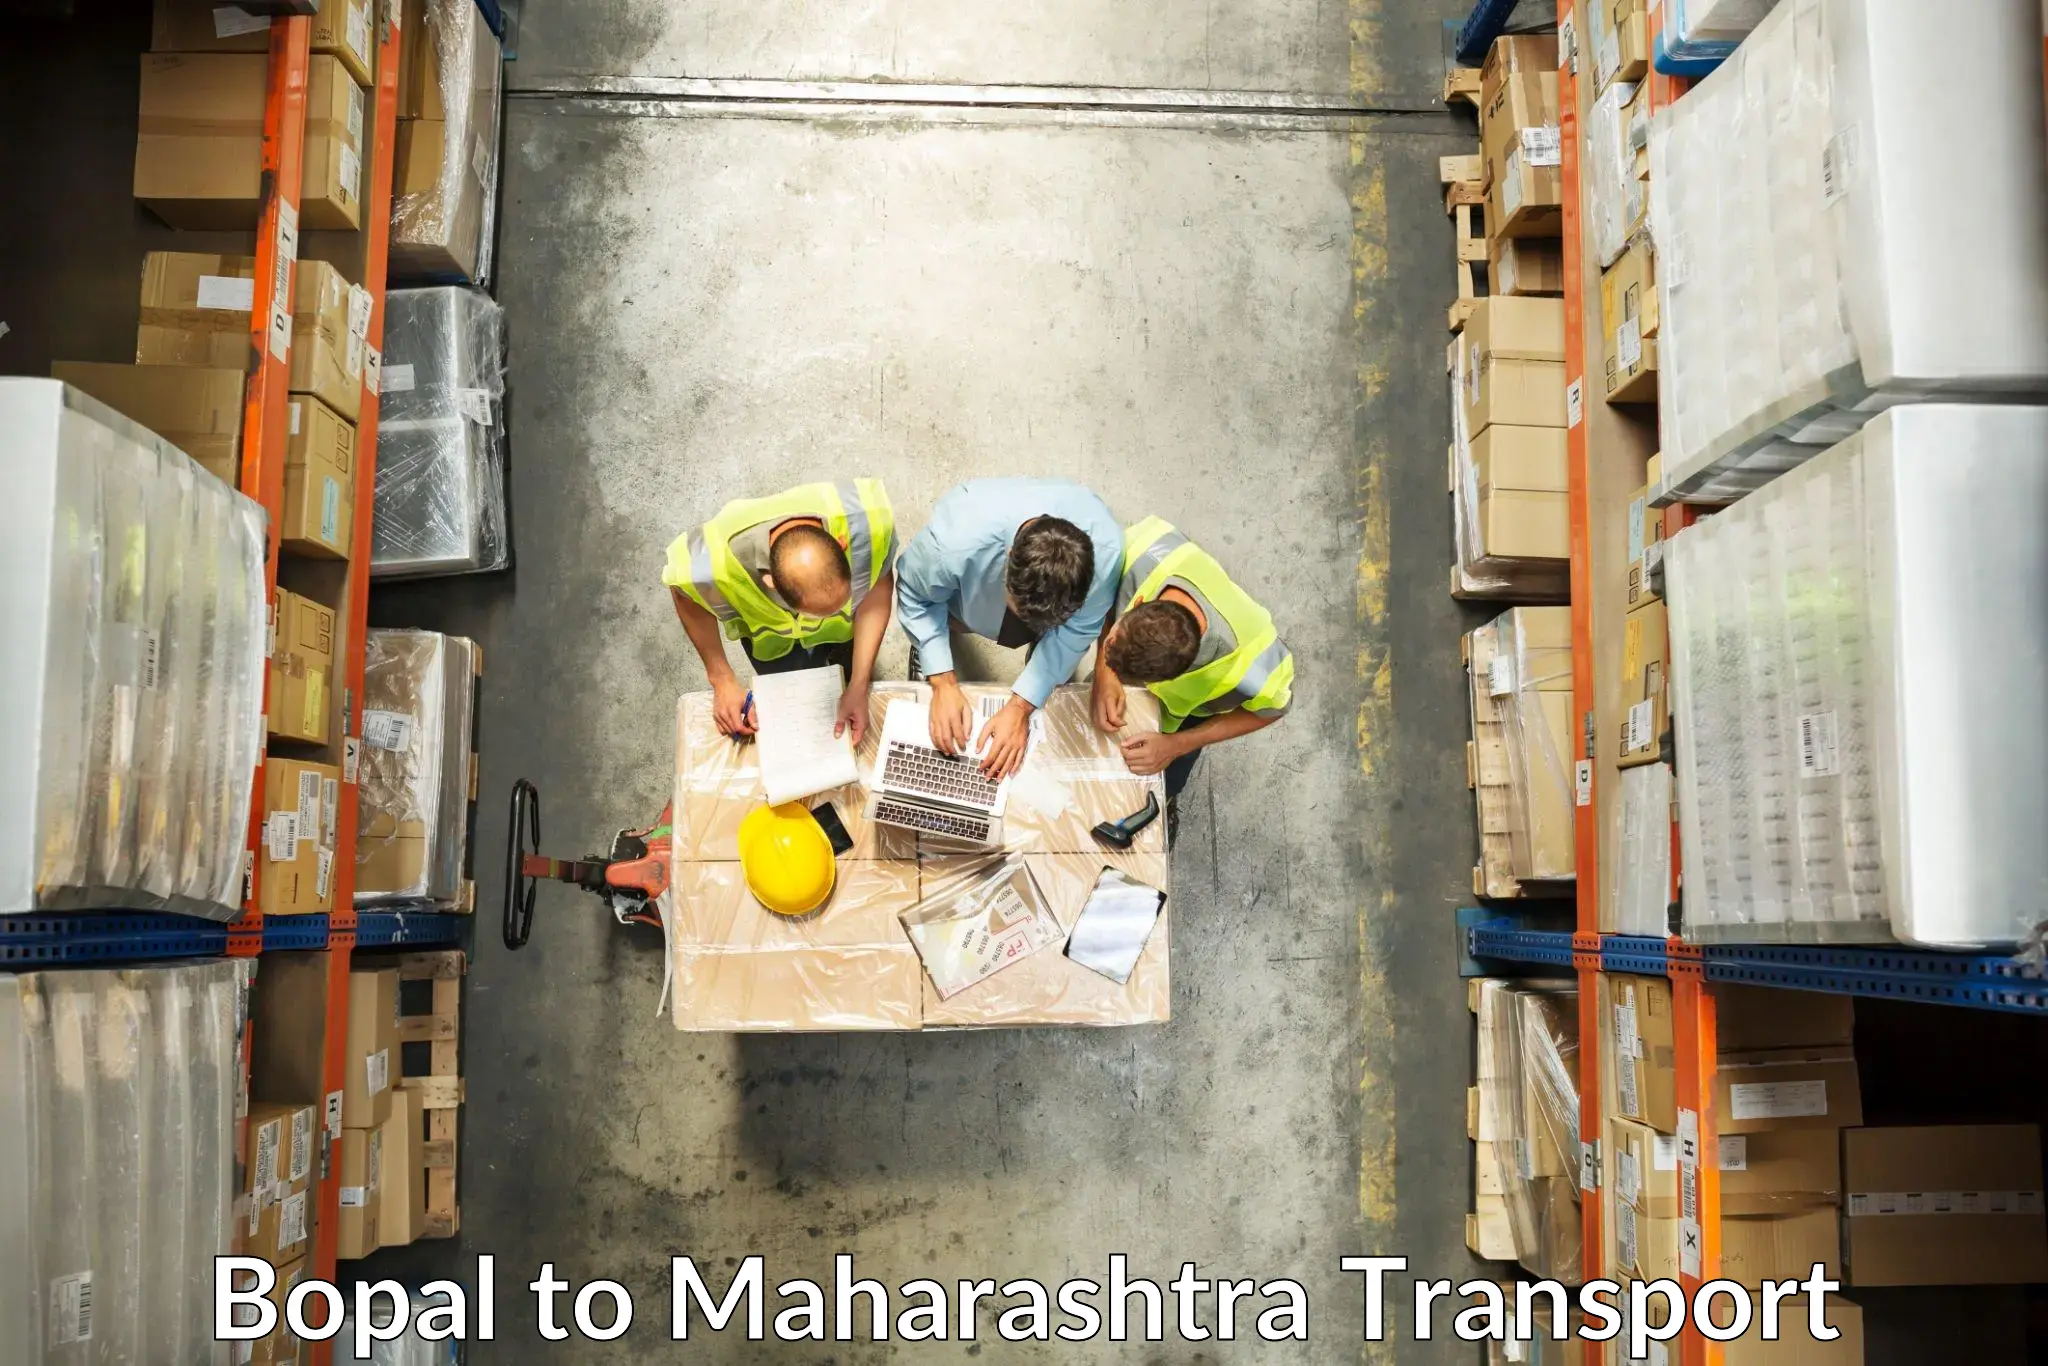 Part load transport service in India in Bopal to Lonavala